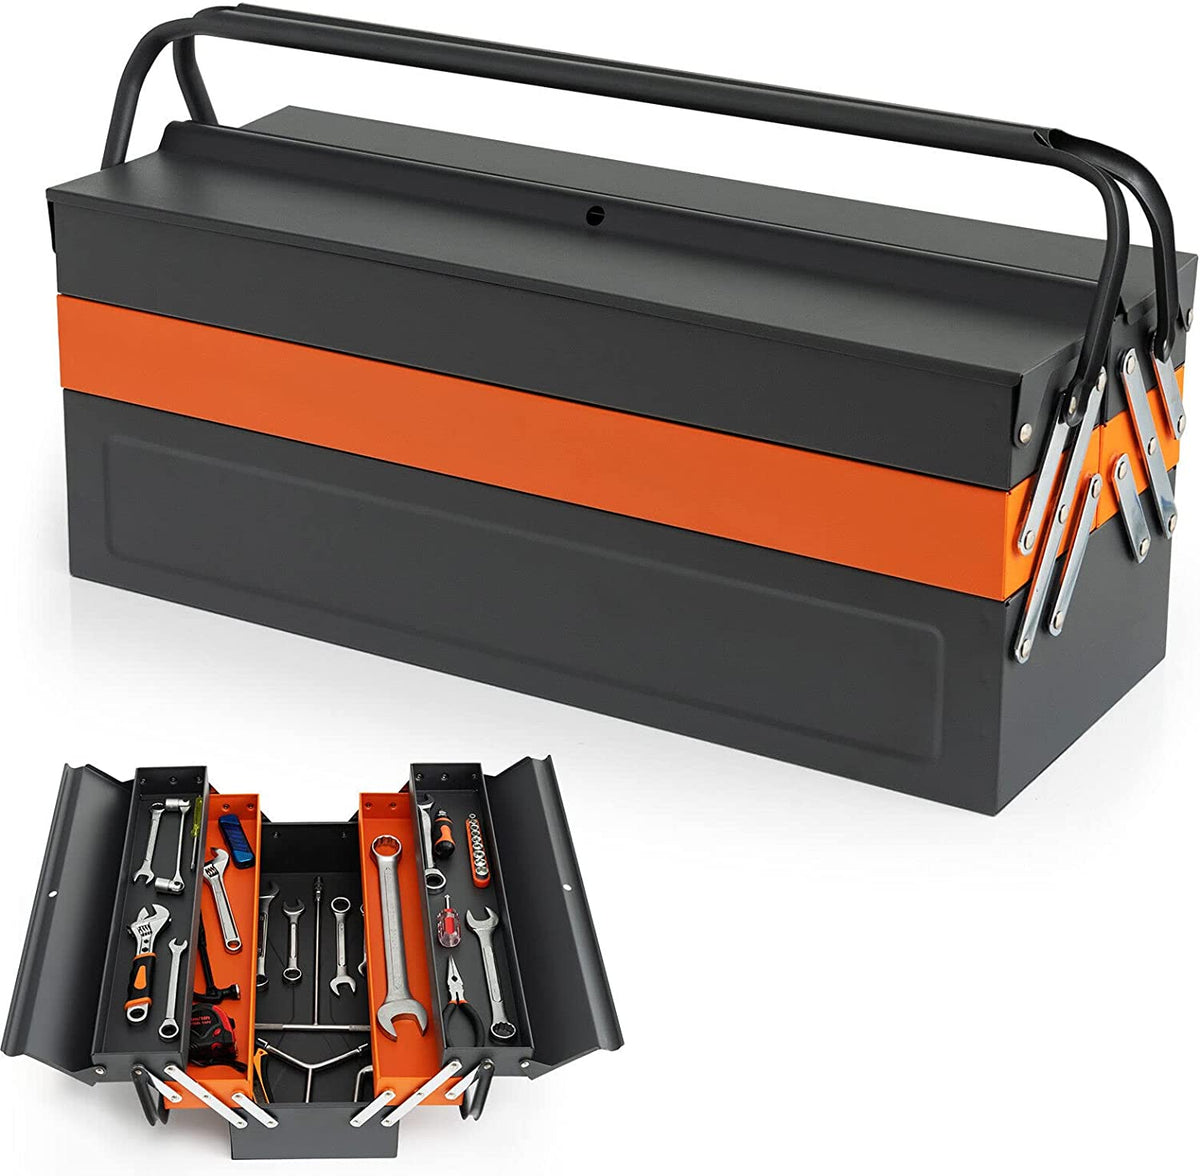 Nightcore 27” X 21” X 8.5” Metal Tool Box, 5-Tray Cantilever Tool Box with 3 Levels Fold Out Organizer Storage, Portable Folding Tool Organizer with Padlock Eyes